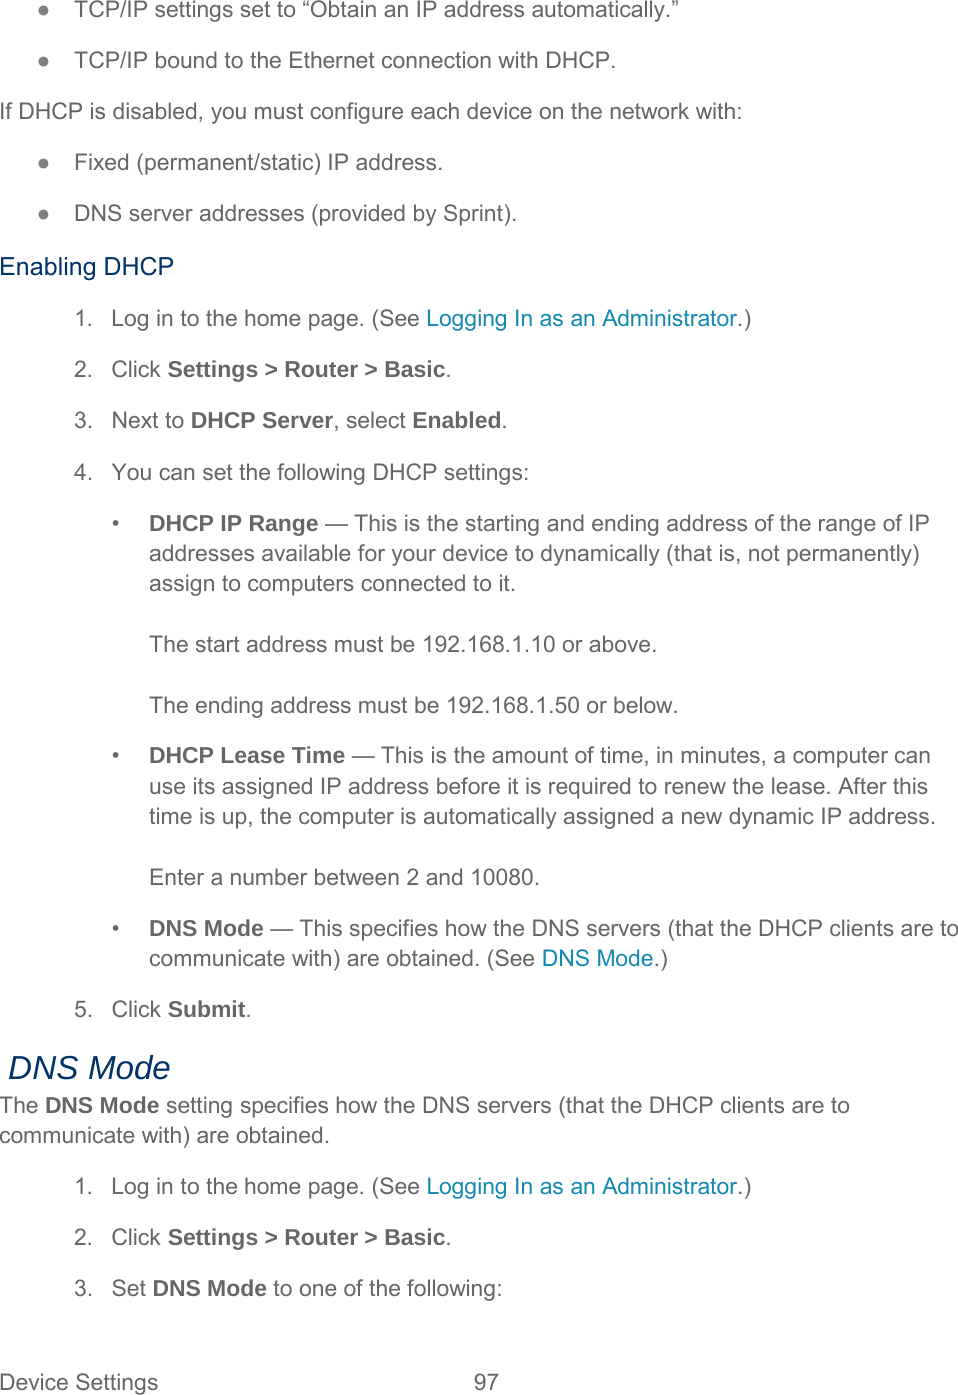 ●  TCP/IP settings set to “Obtain an IP address automatically.” ●  TCP/IP bound to the Ethernet connection with DHCP. If DHCP is disabled, you must configure each device on the network with: ●  Fixed (permanent/static) IP address. ●  DNS server addresses (provided by Sprint). Enabling DHCP 1. Log in to the home page. (See Logging In as an Administrator.) 2. Click Settings &gt; Router &gt; Basic. 3. Next to DHCP Server, select Enabled. 4. You can set the following DHCP settings: •  DHCP IP Range — This is the starting and ending address of the range of IP addresses available for your device to dynamically (that is, not permanently) assign to computers connected to it.  The start address must be 192.168.1.10 or above.   The ending address must be 192.168.1.50 or below. •  DHCP Lease Time — This is the amount of time, in minutes, a computer can use its assigned IP address before it is required to renew the lease. After this time is up, the computer is automatically assigned a new dynamic IP address.  Enter a number between 2 and 10080. •  DNS Mode — This specifies how the DNS servers (that the DHCP clients are to communicate with) are obtained. (See DNS Mode.) 5. Click Submit.  DNS Mode The DNS Mode setting specifies how the DNS servers (that the DHCP clients are to communicate with) are obtained. 1. Log in to the home page. (See Logging In as an Administrator.) 2. Click Settings &gt; Router &gt; Basic. 3. Set DNS Mode to one of the following: Device Settings 97   